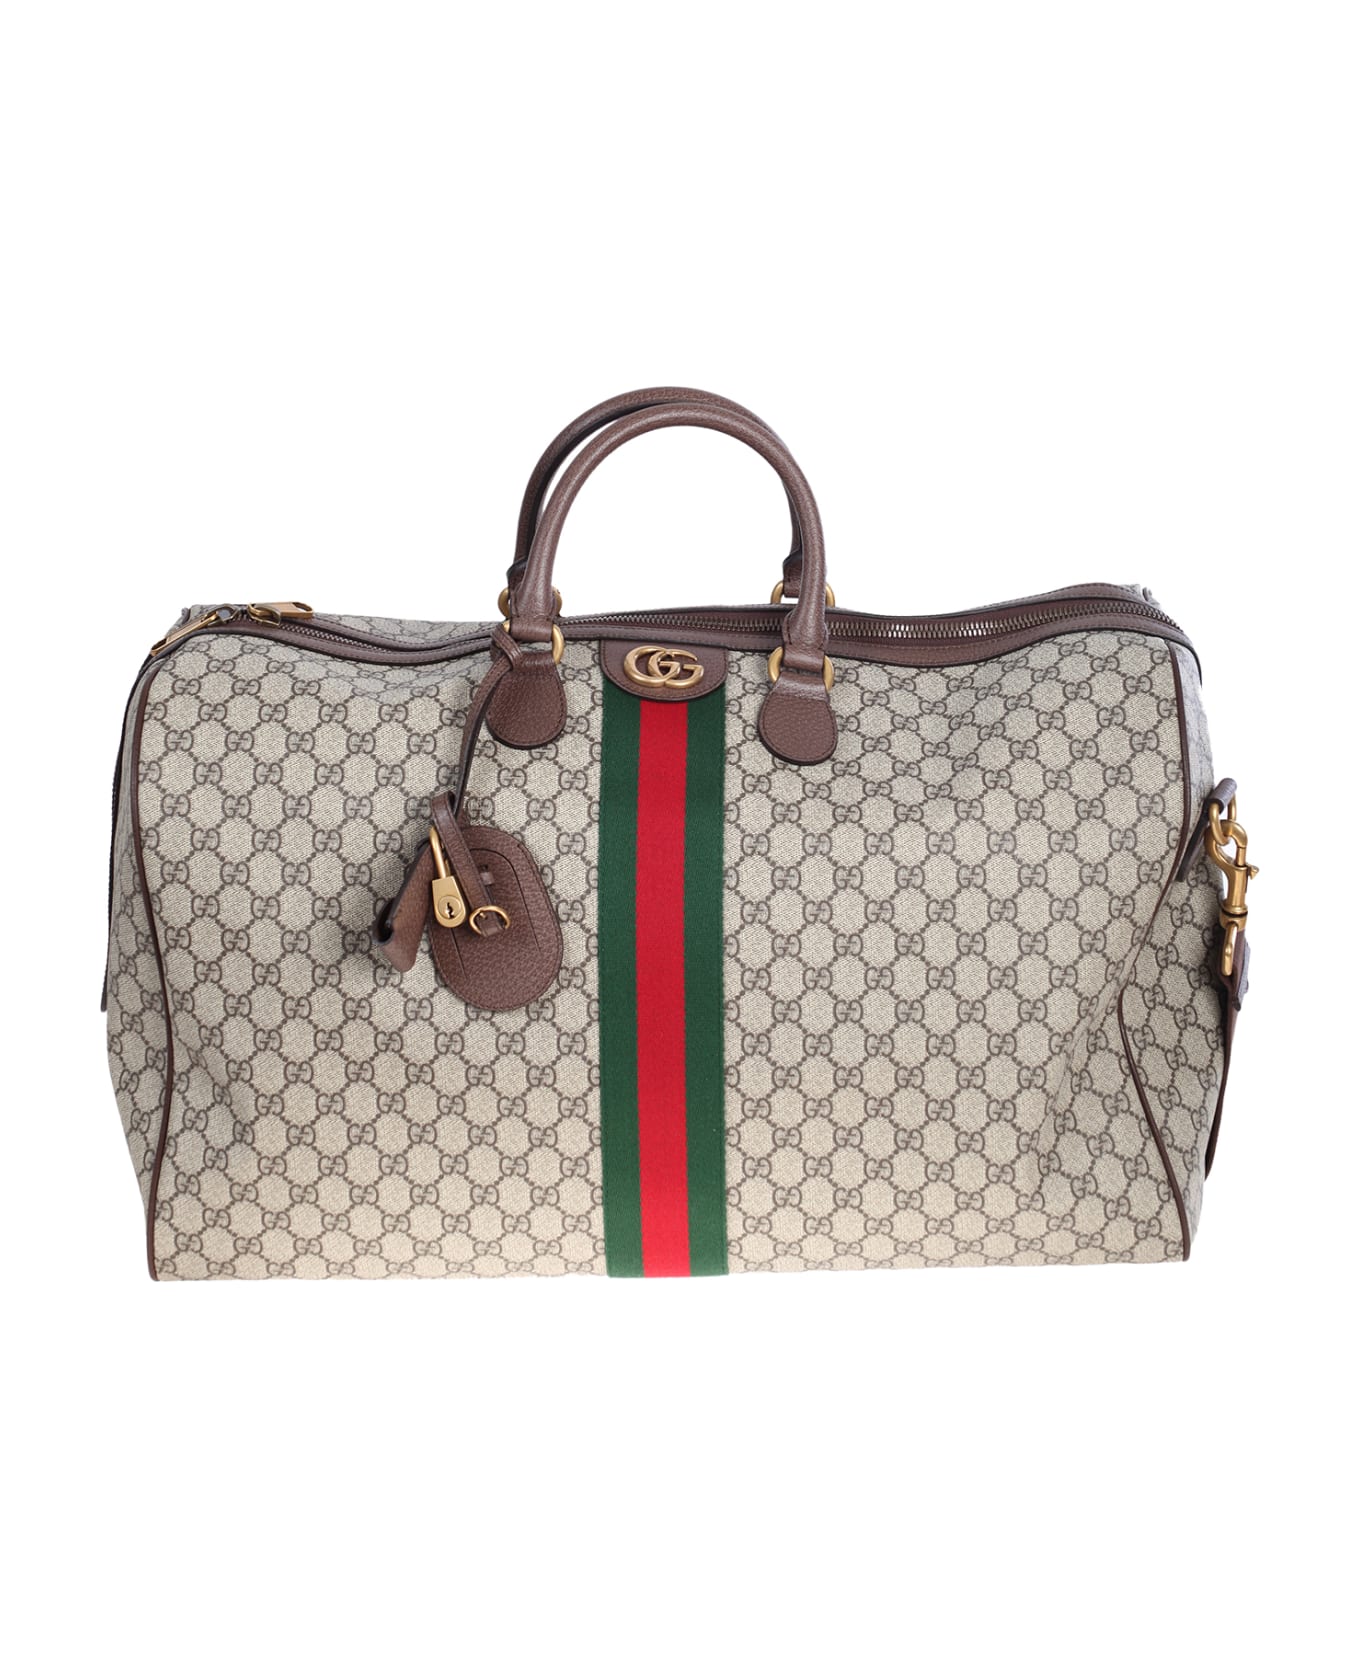 Gucci Ophidia travel bag | italist